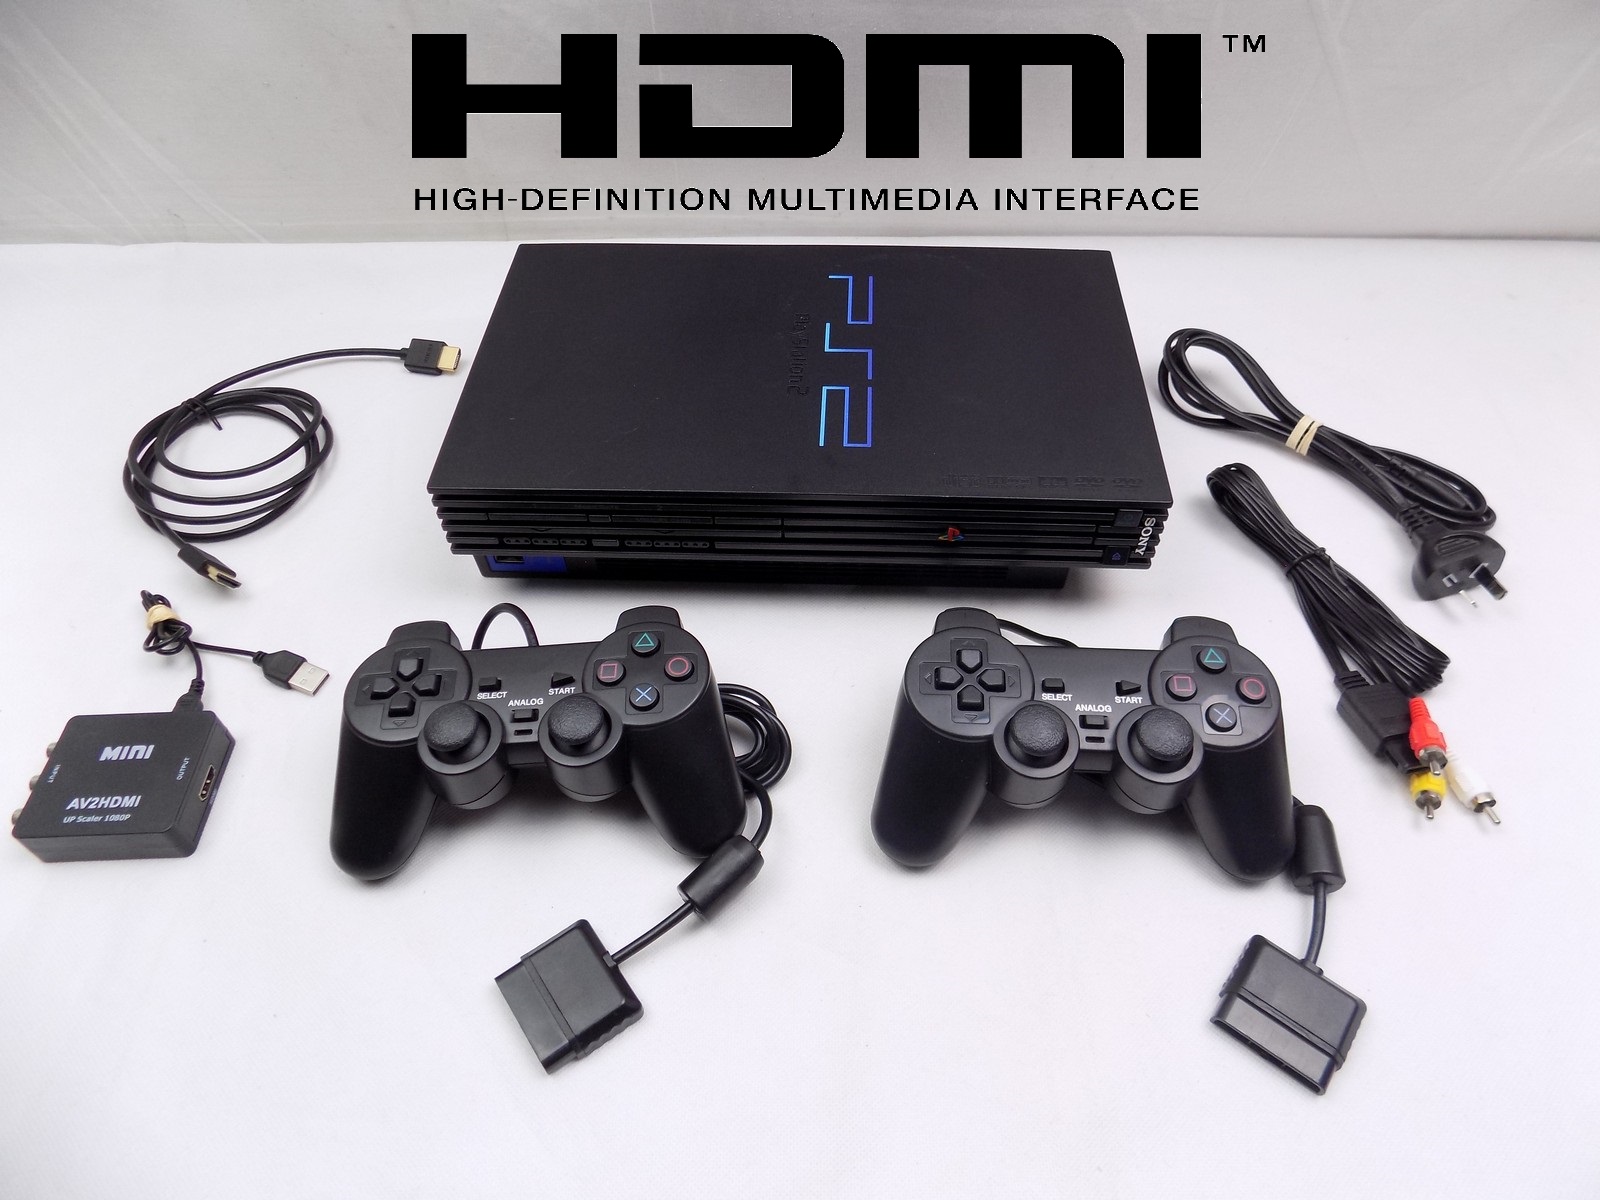 Sony PlayStation 2 PS2 Fat Console System Complete Bundle Working!